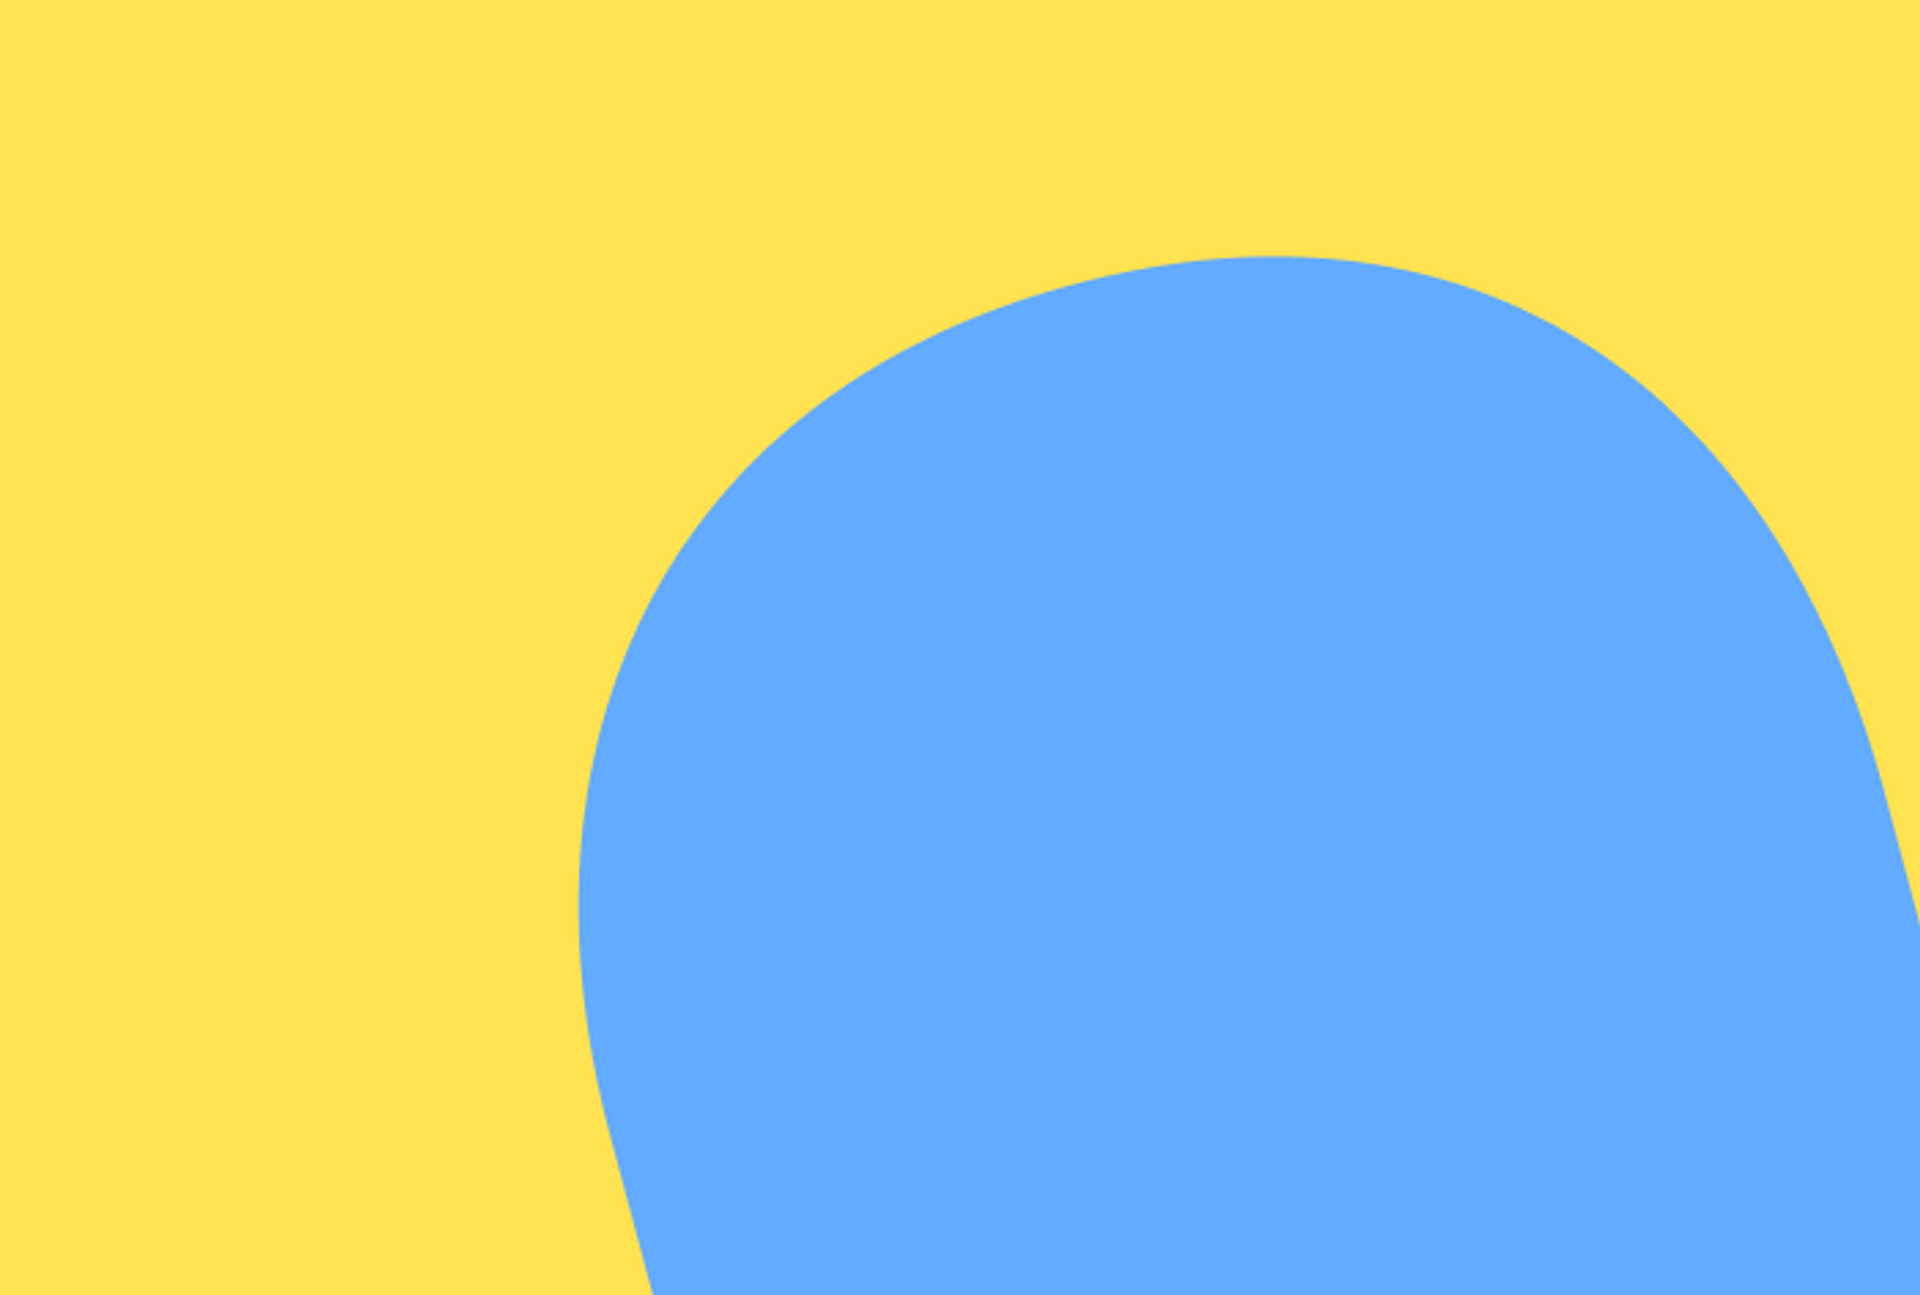 yellow and blue shapes